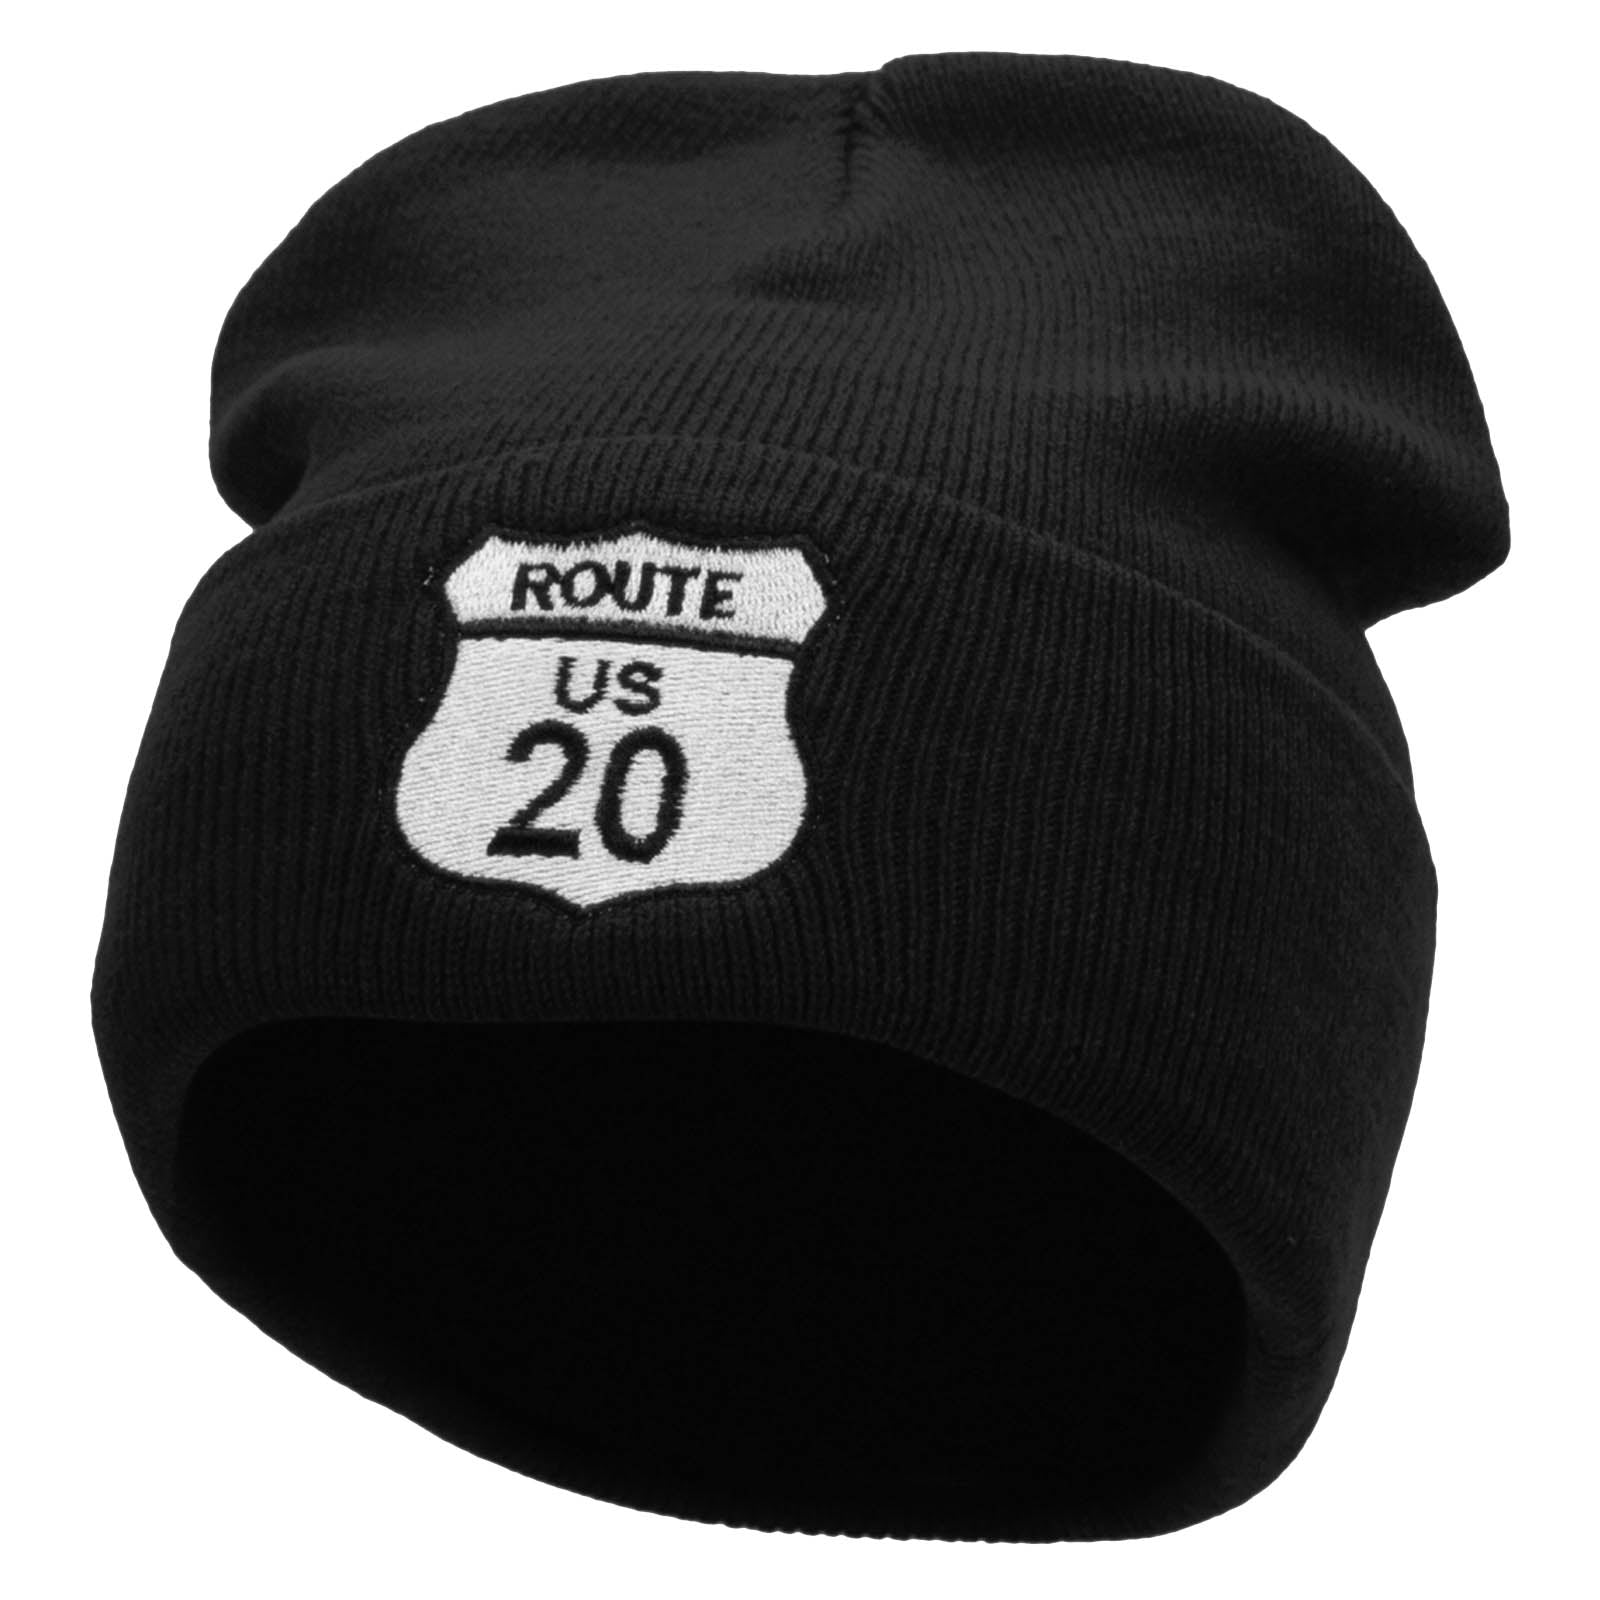 Route US 20 Embroidered 12 Inch Long Knitted Beanie - Black OSFM